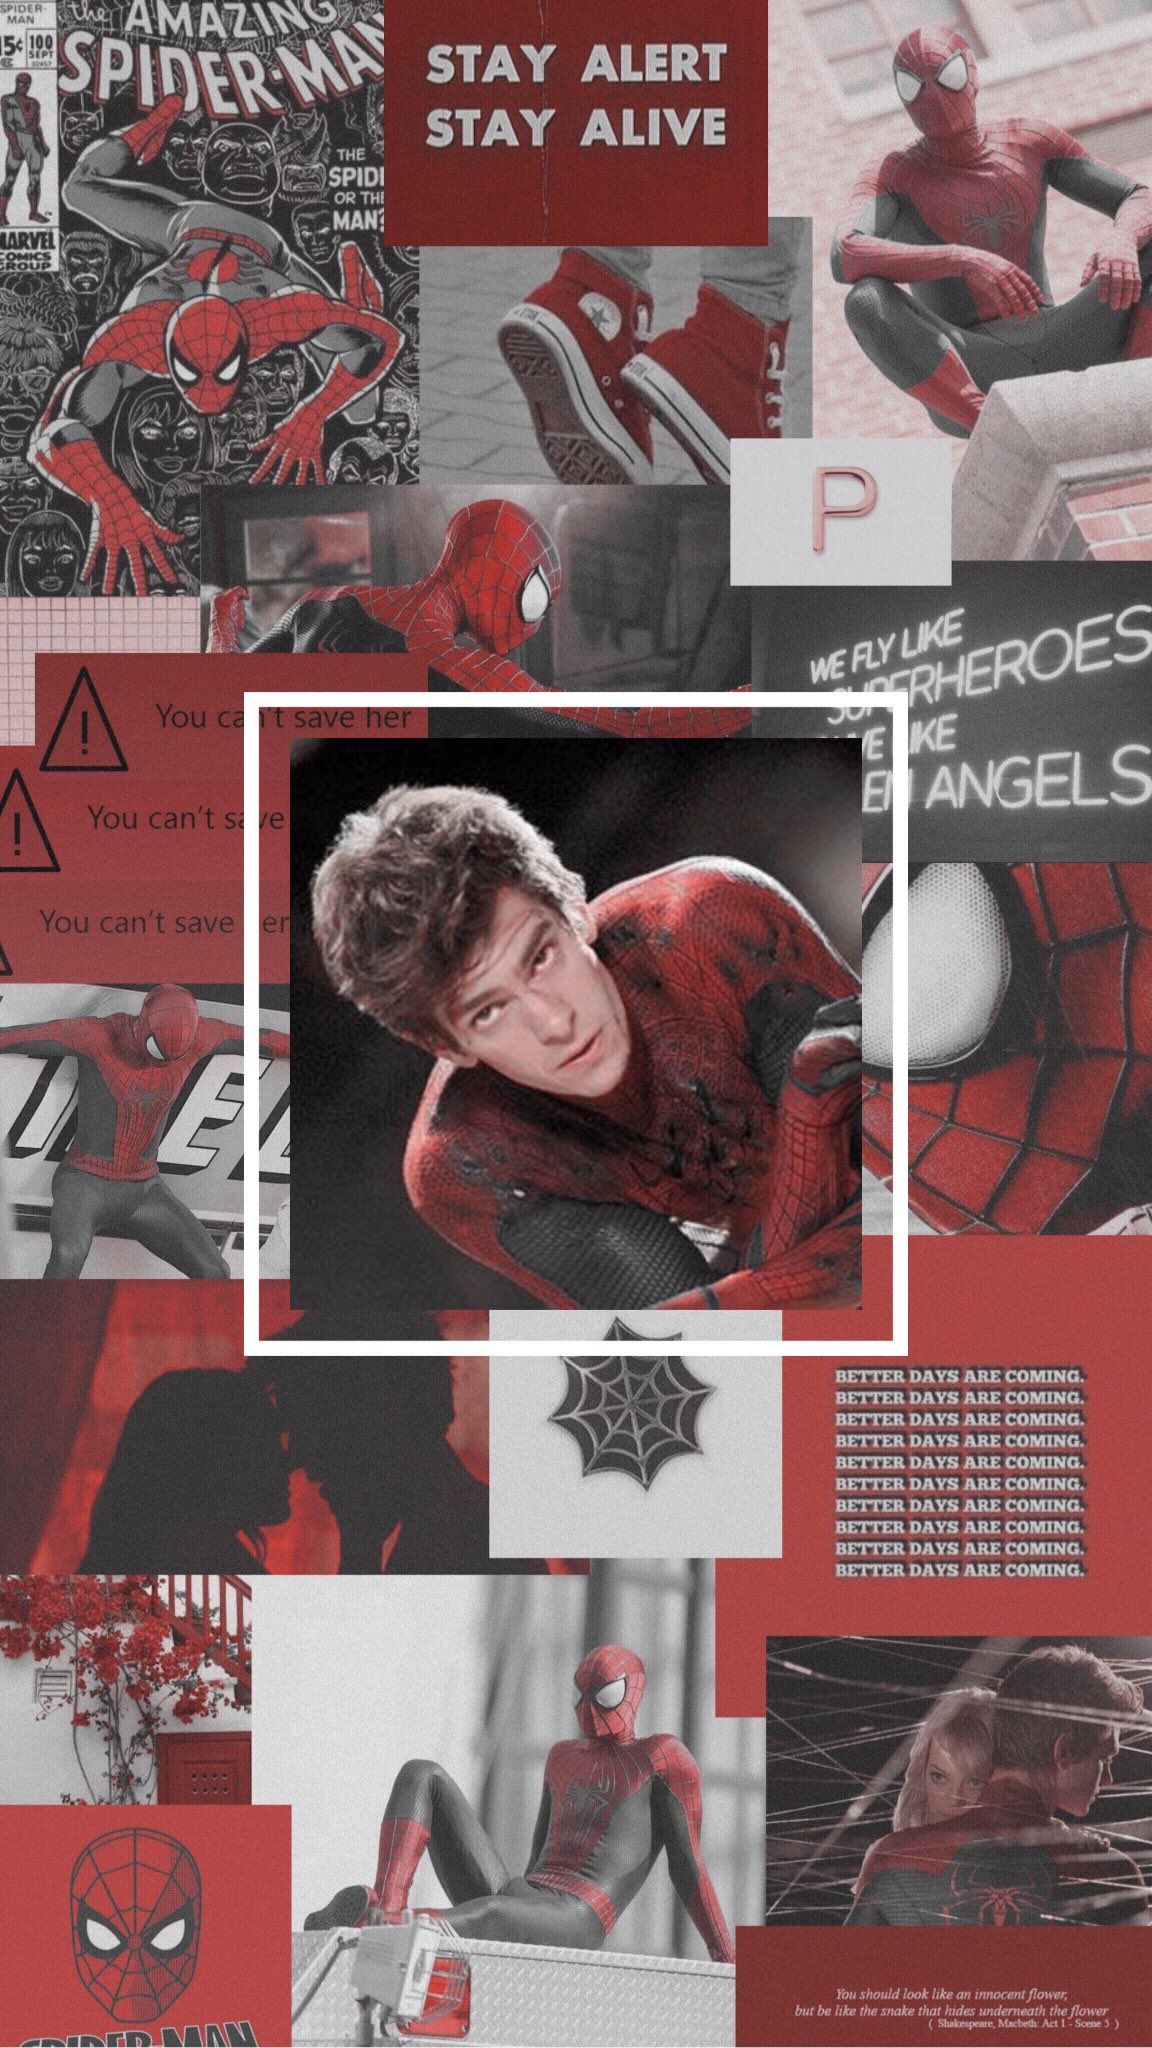 Spiderman red aesthetic wallpaper for phone. - Andrew Garfield